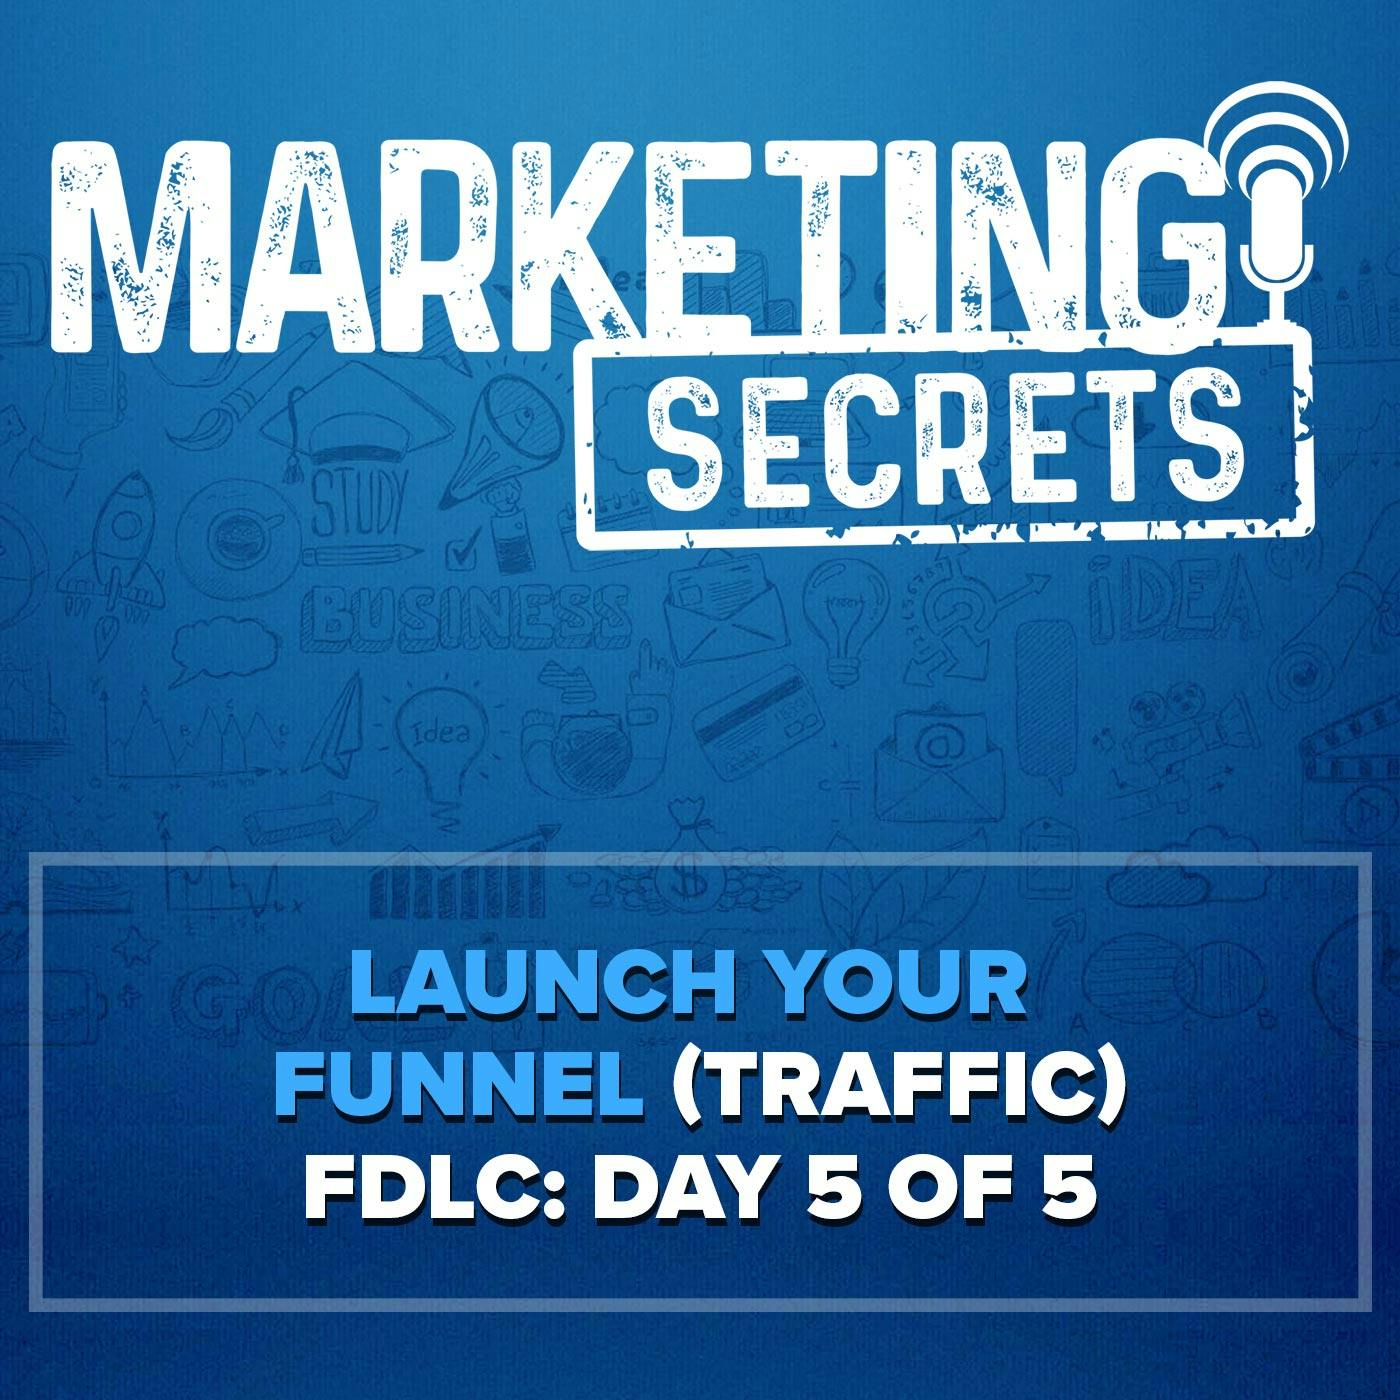 Launch Your Funnel (Traffic) - FDLC: Day 5 of 5